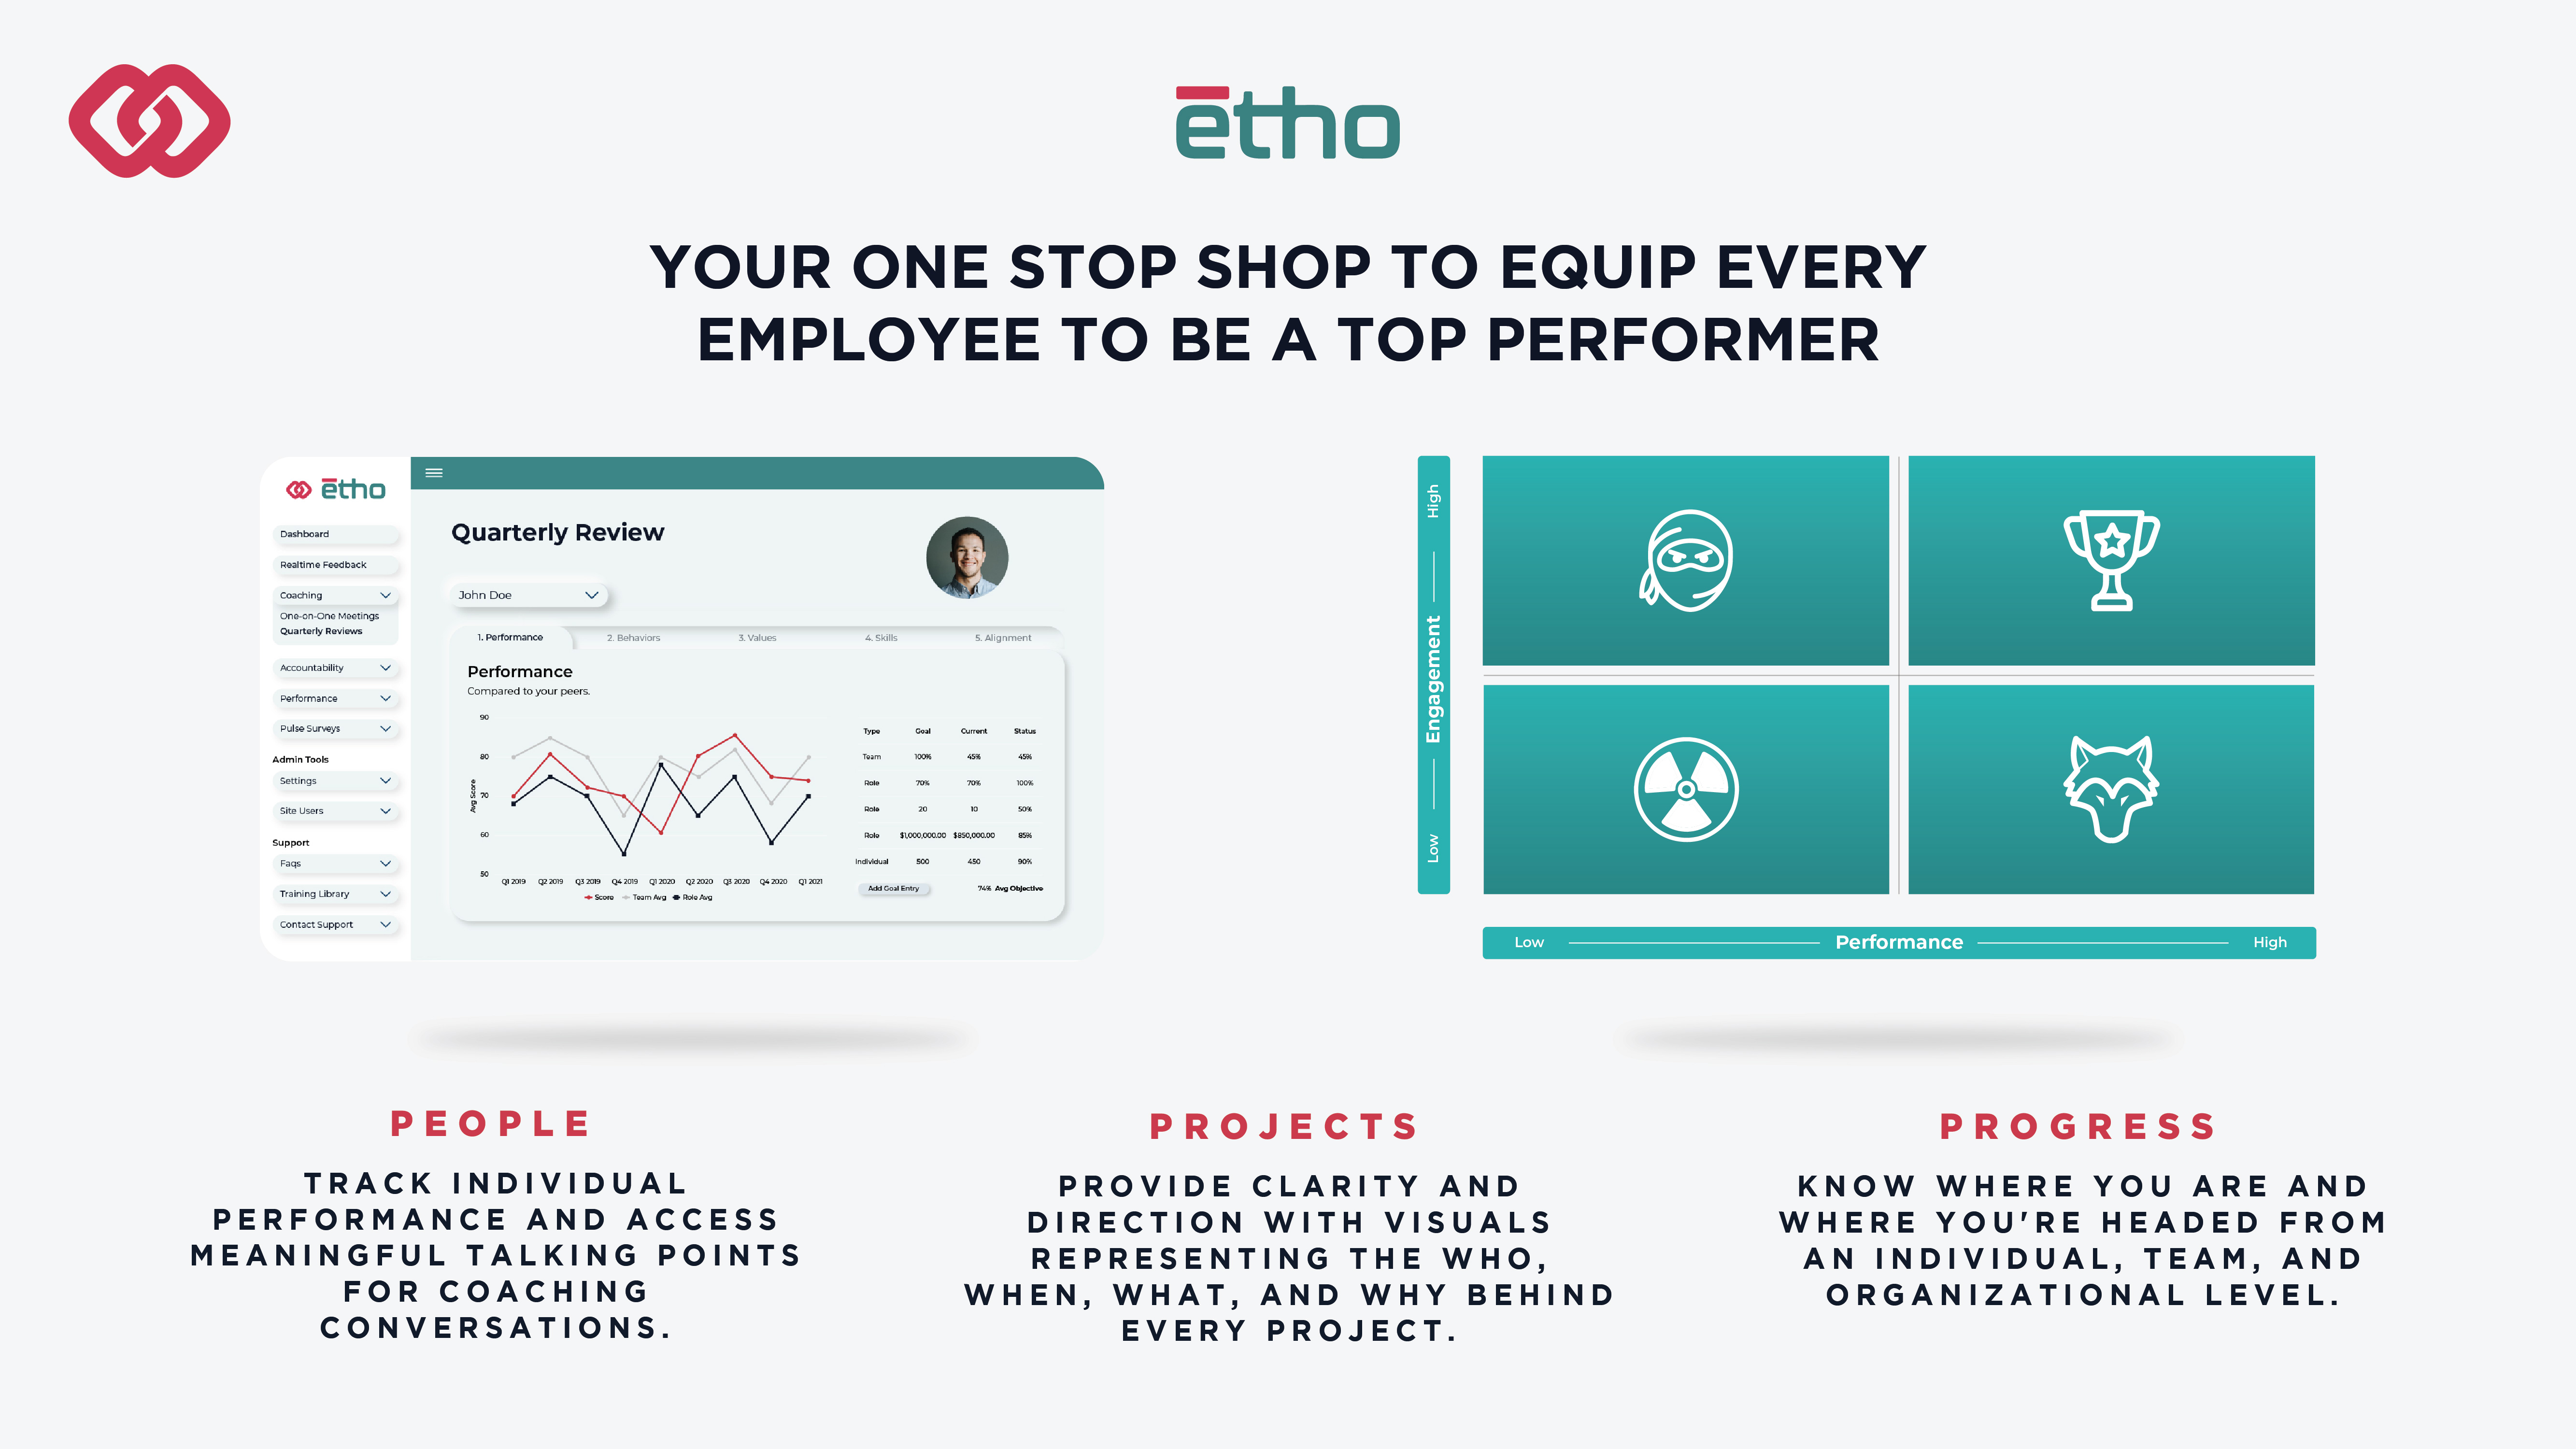 Etho - Your one stop shop to equip every employee to be a top performer.